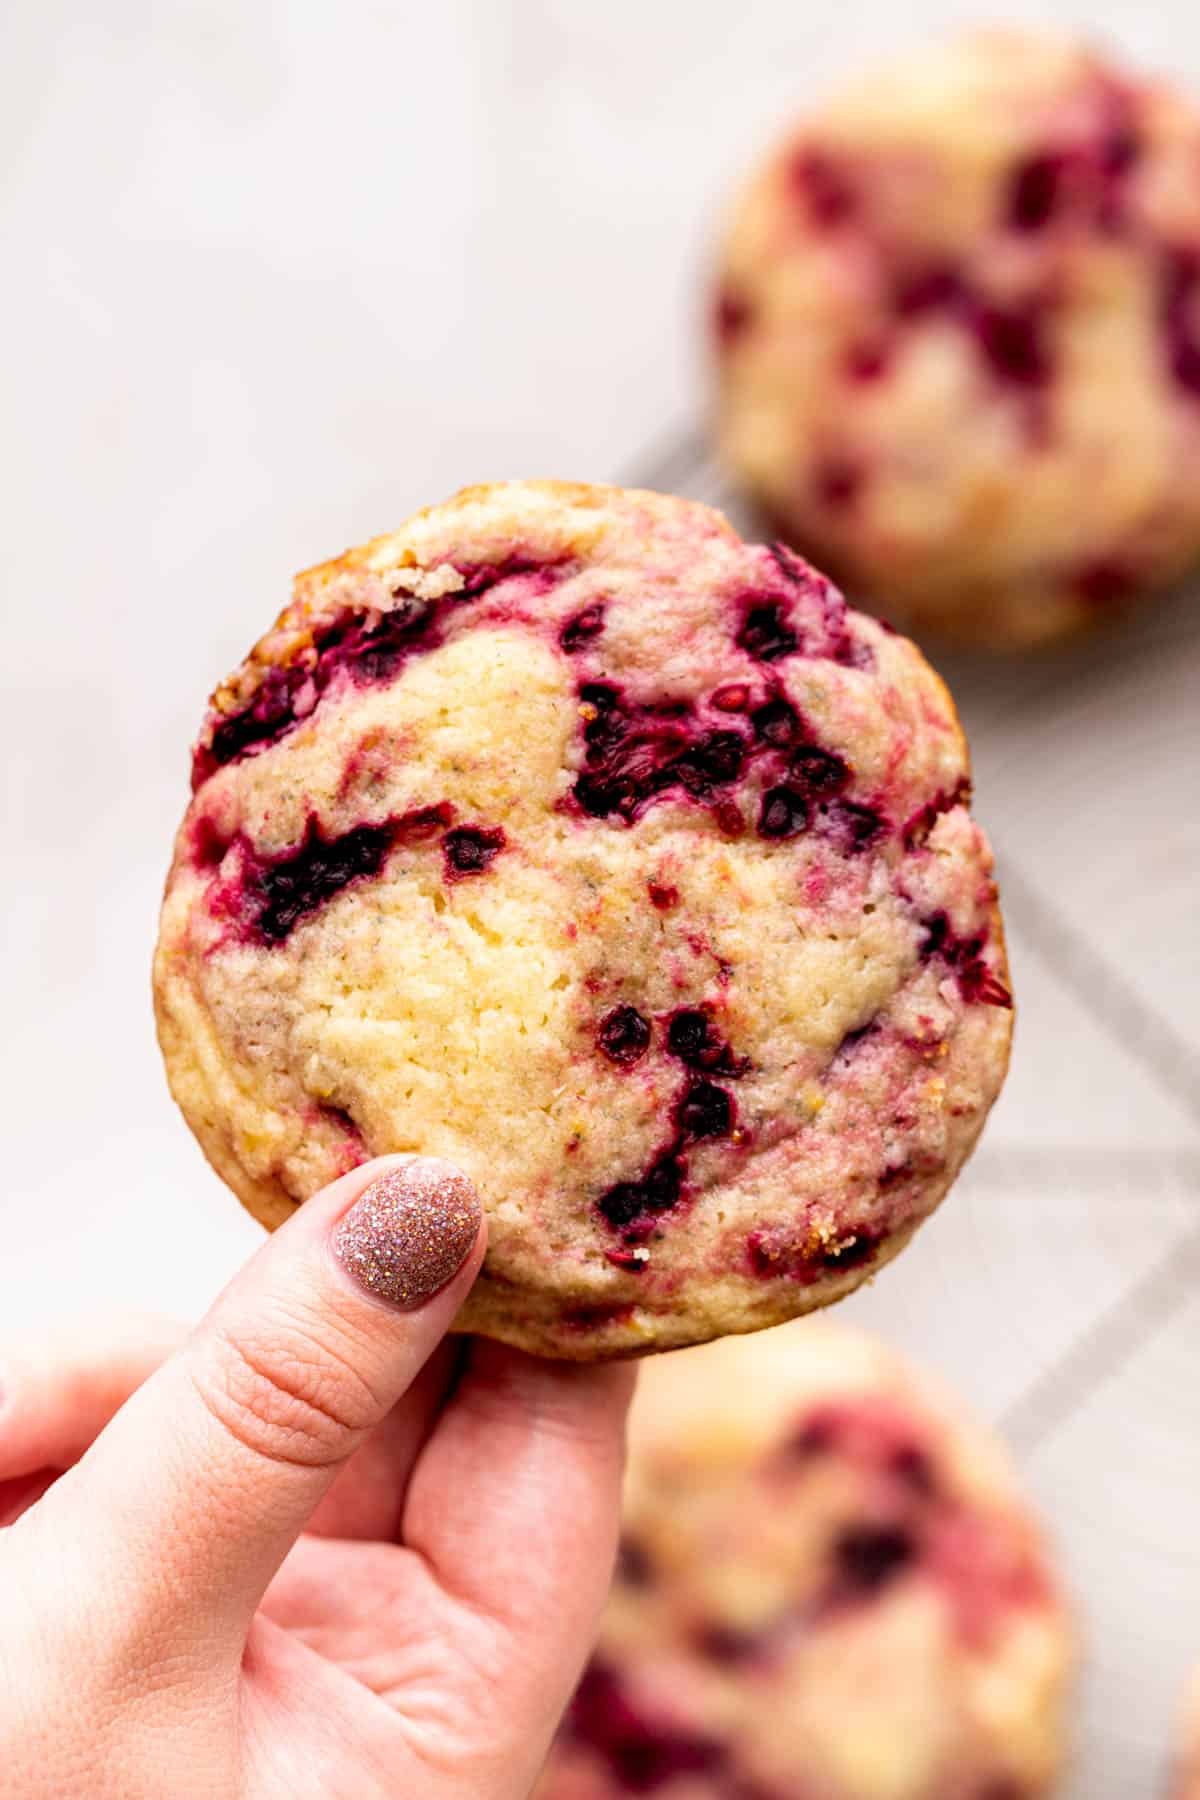 Holding a lemon blackberry cookie in my hand.